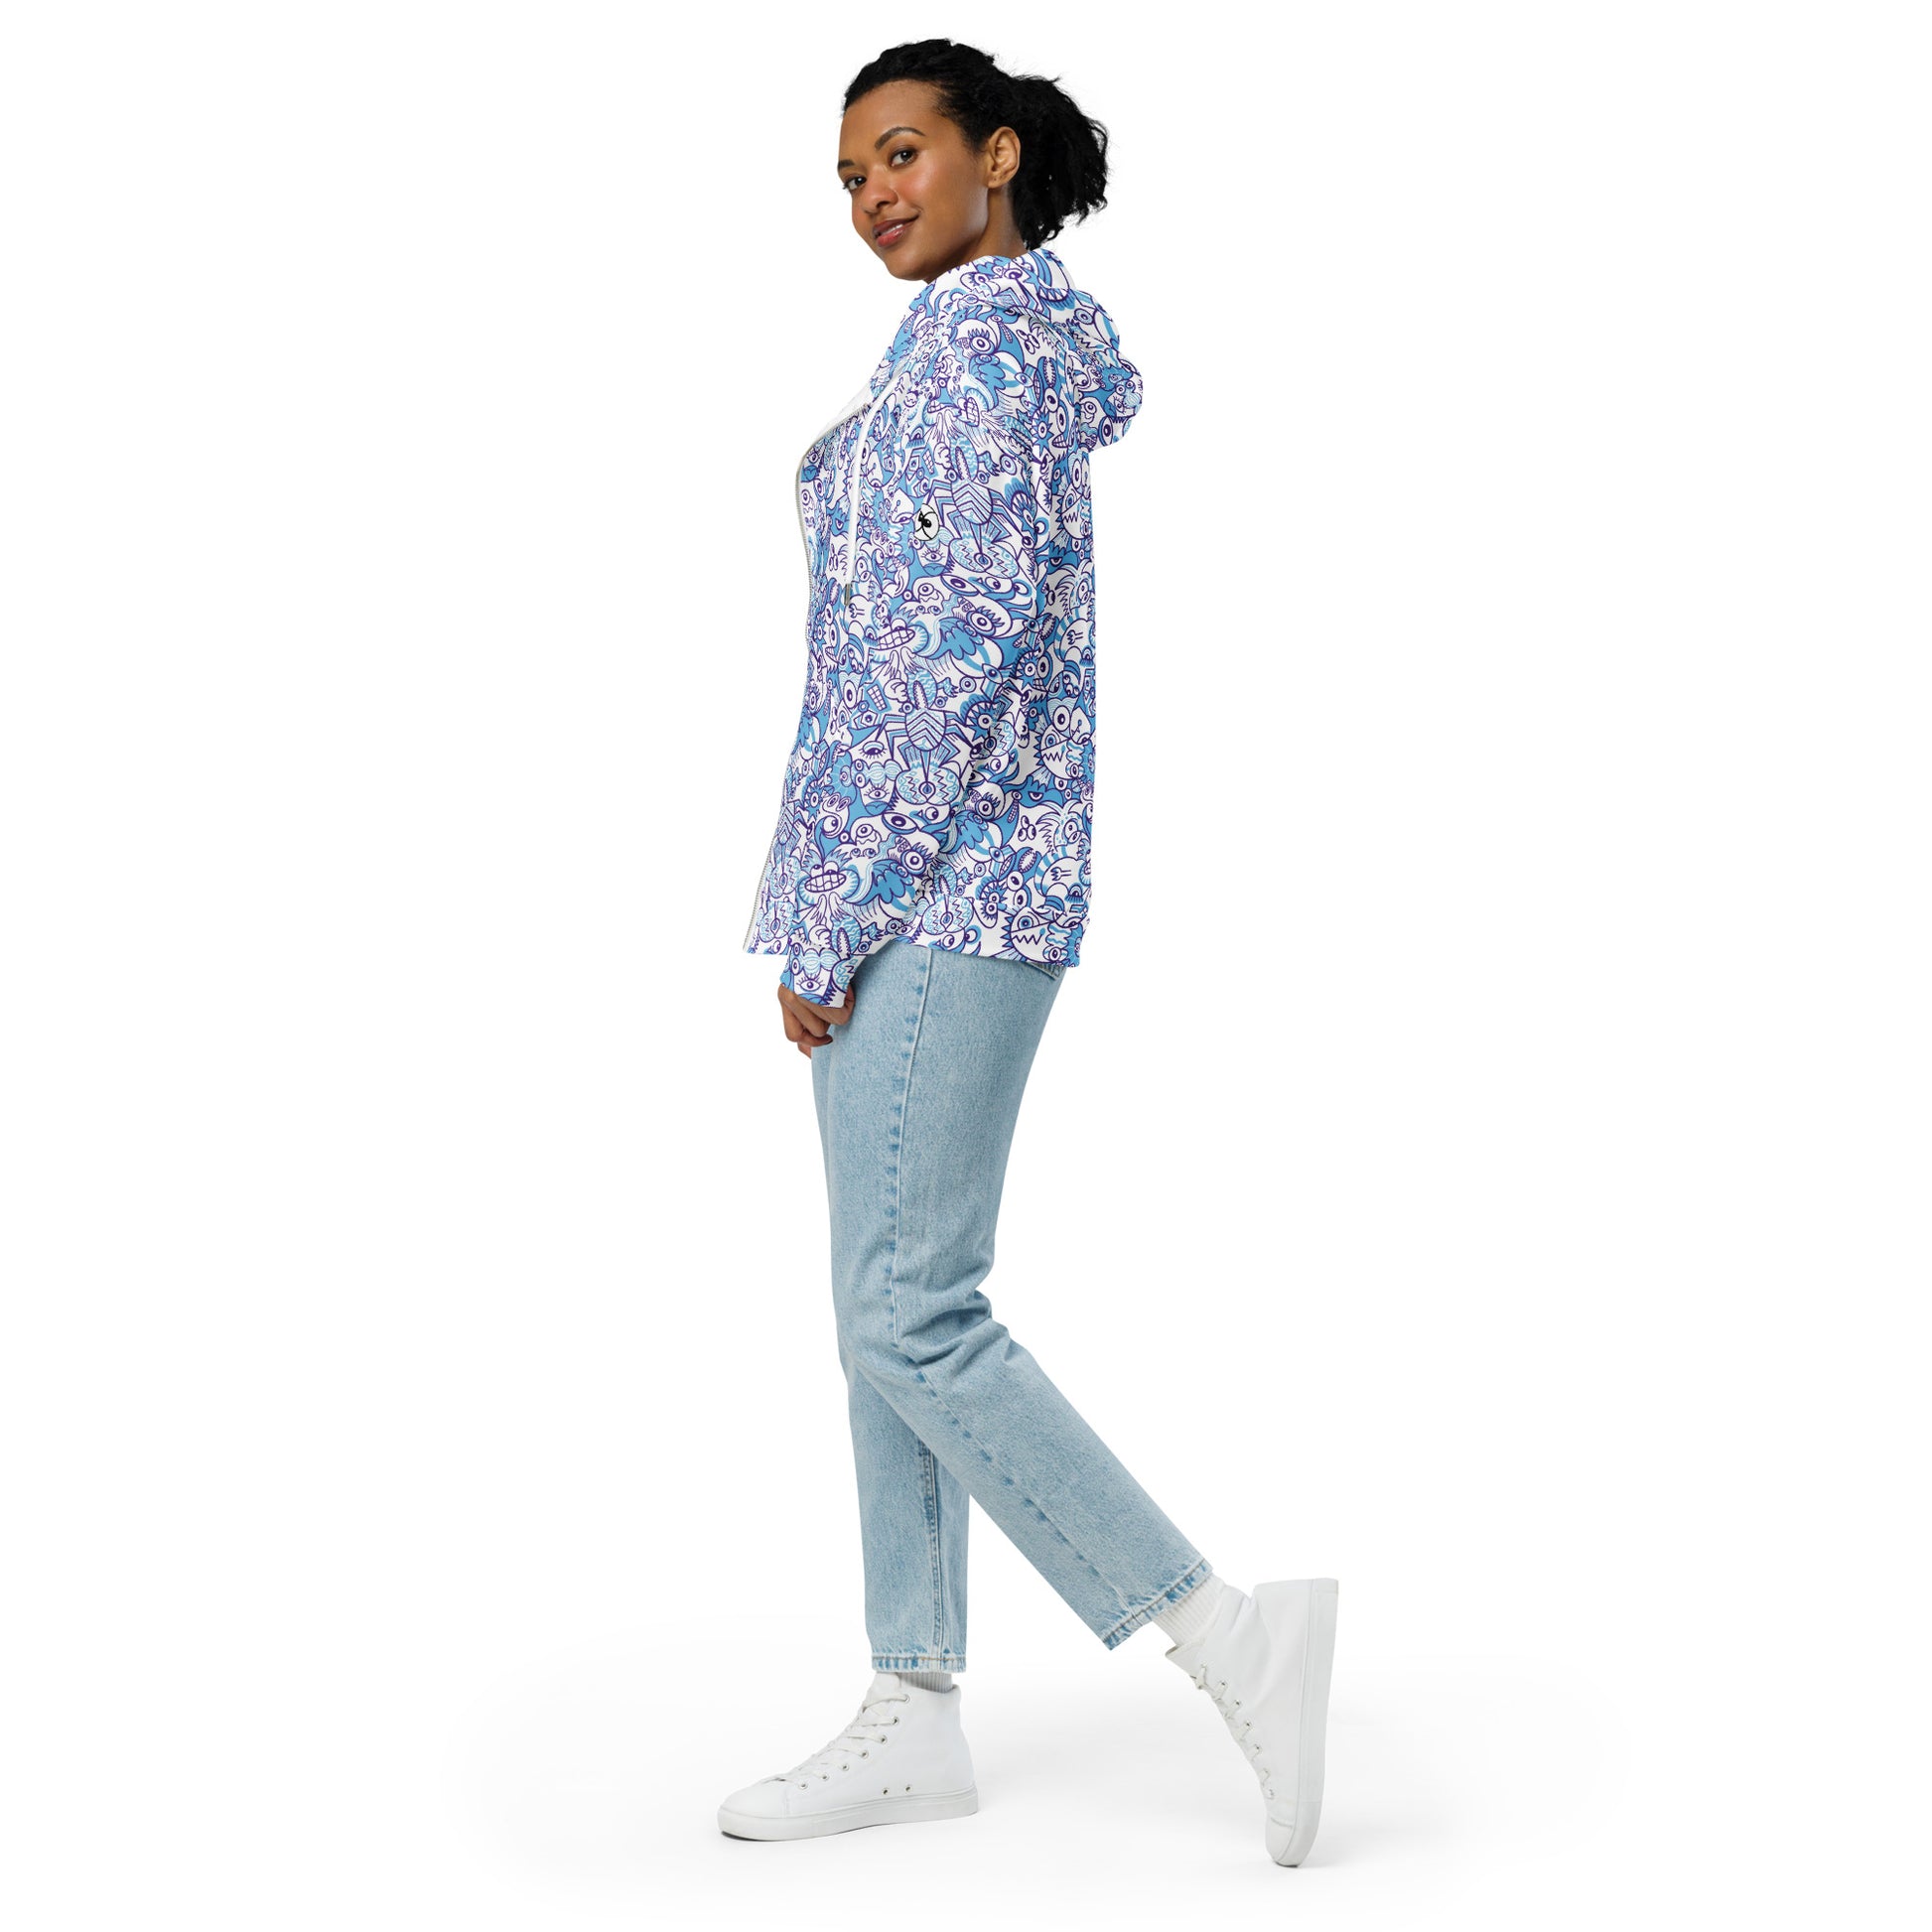 Whimsical Blue Doodle Critterscape pattern design - Unisex zip hoodie. Side view